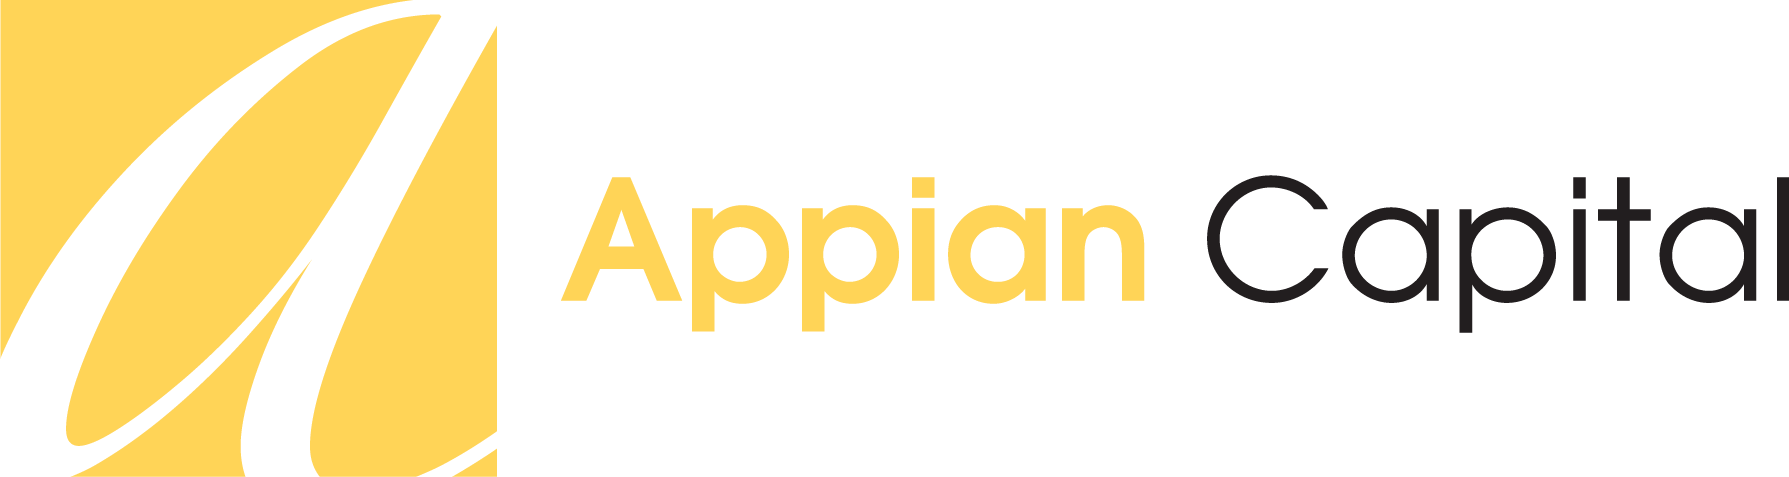 Appian Logo - Appian Capital. Real Estate Investment Manager. Retail